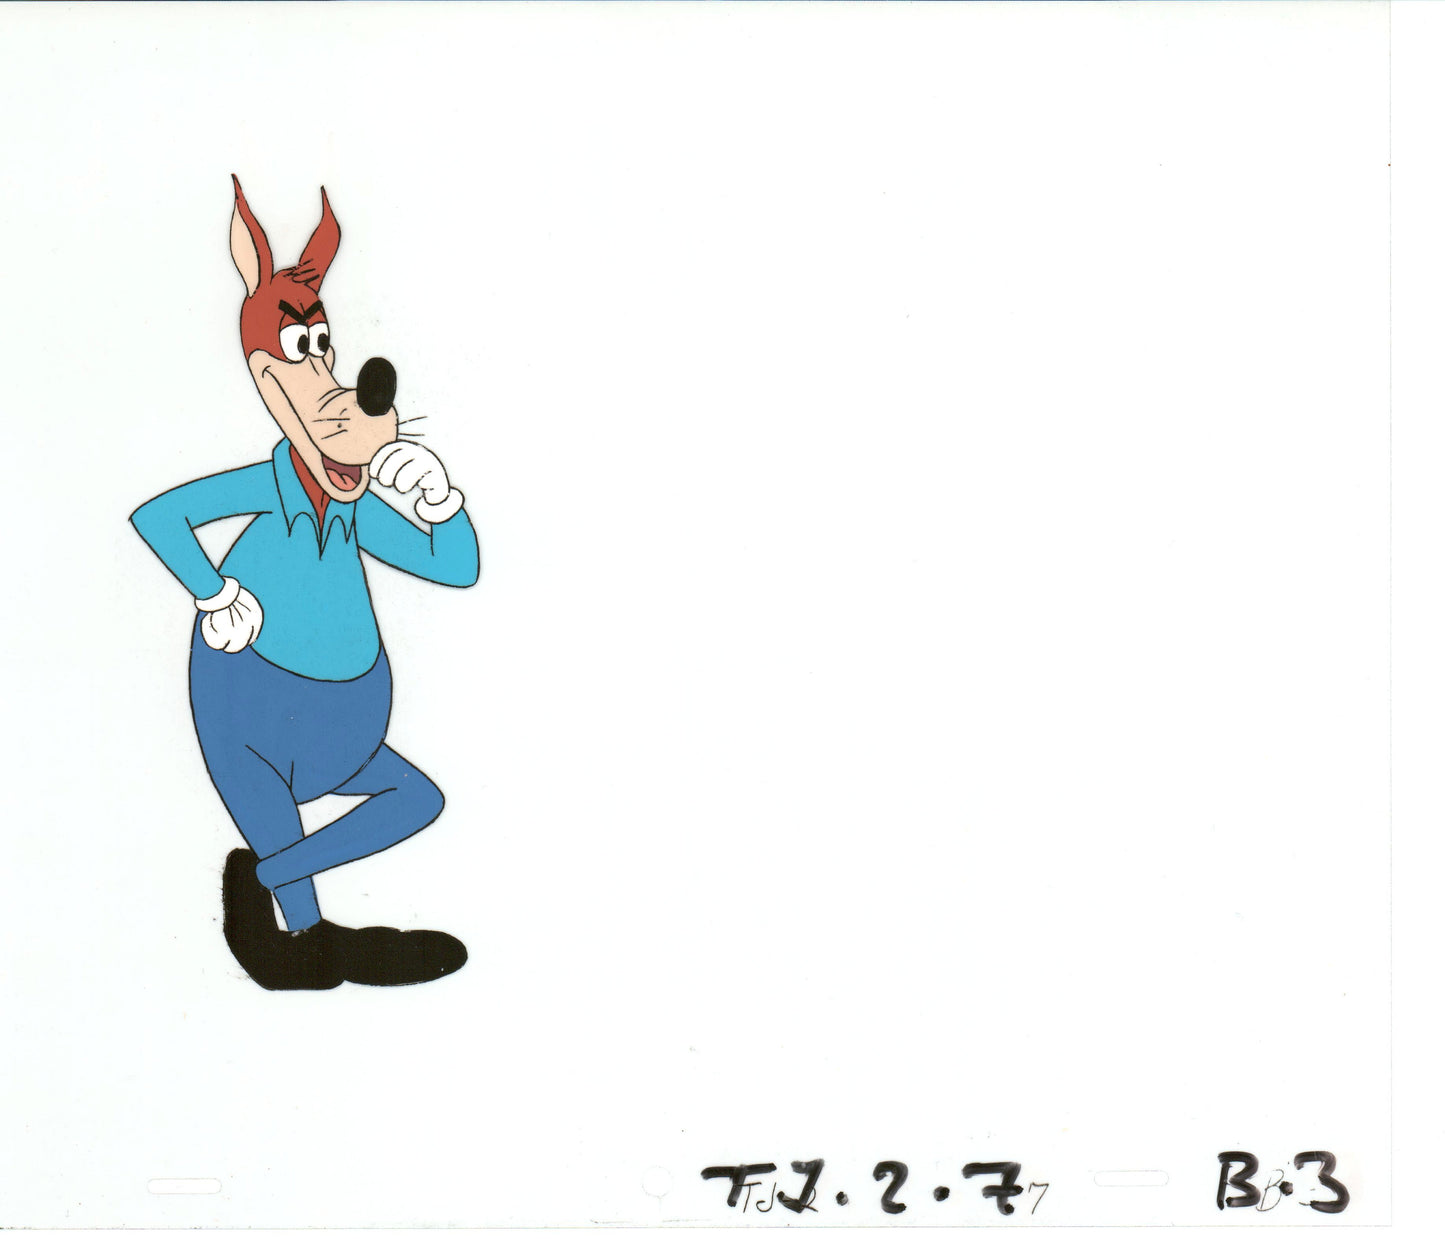 Tom & Jerry Original Production Animation Cel from Filmation 1980-82 b4369